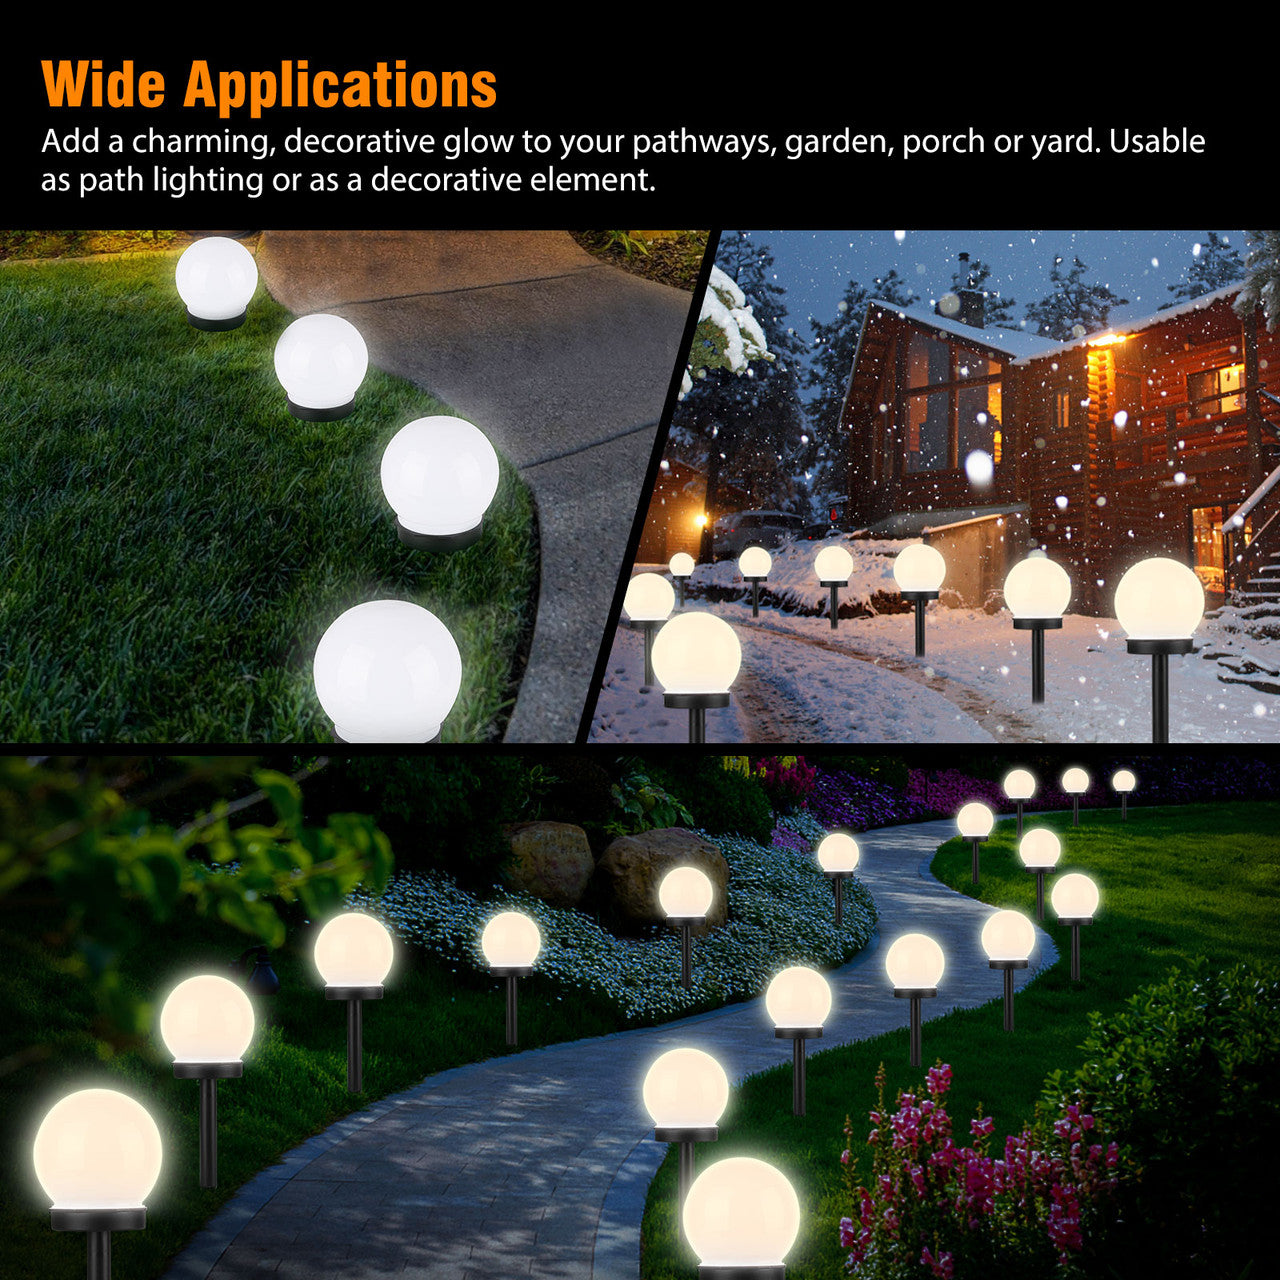 Outdoor Solar Lights Ball Lamp, IP55 Waterproof LED Path Light with Auto On/Off Light Sensor, Solar Landscape Lighting for Yard Patio Walkway Pathway Outdoor Garden Path (White), 2Pcs